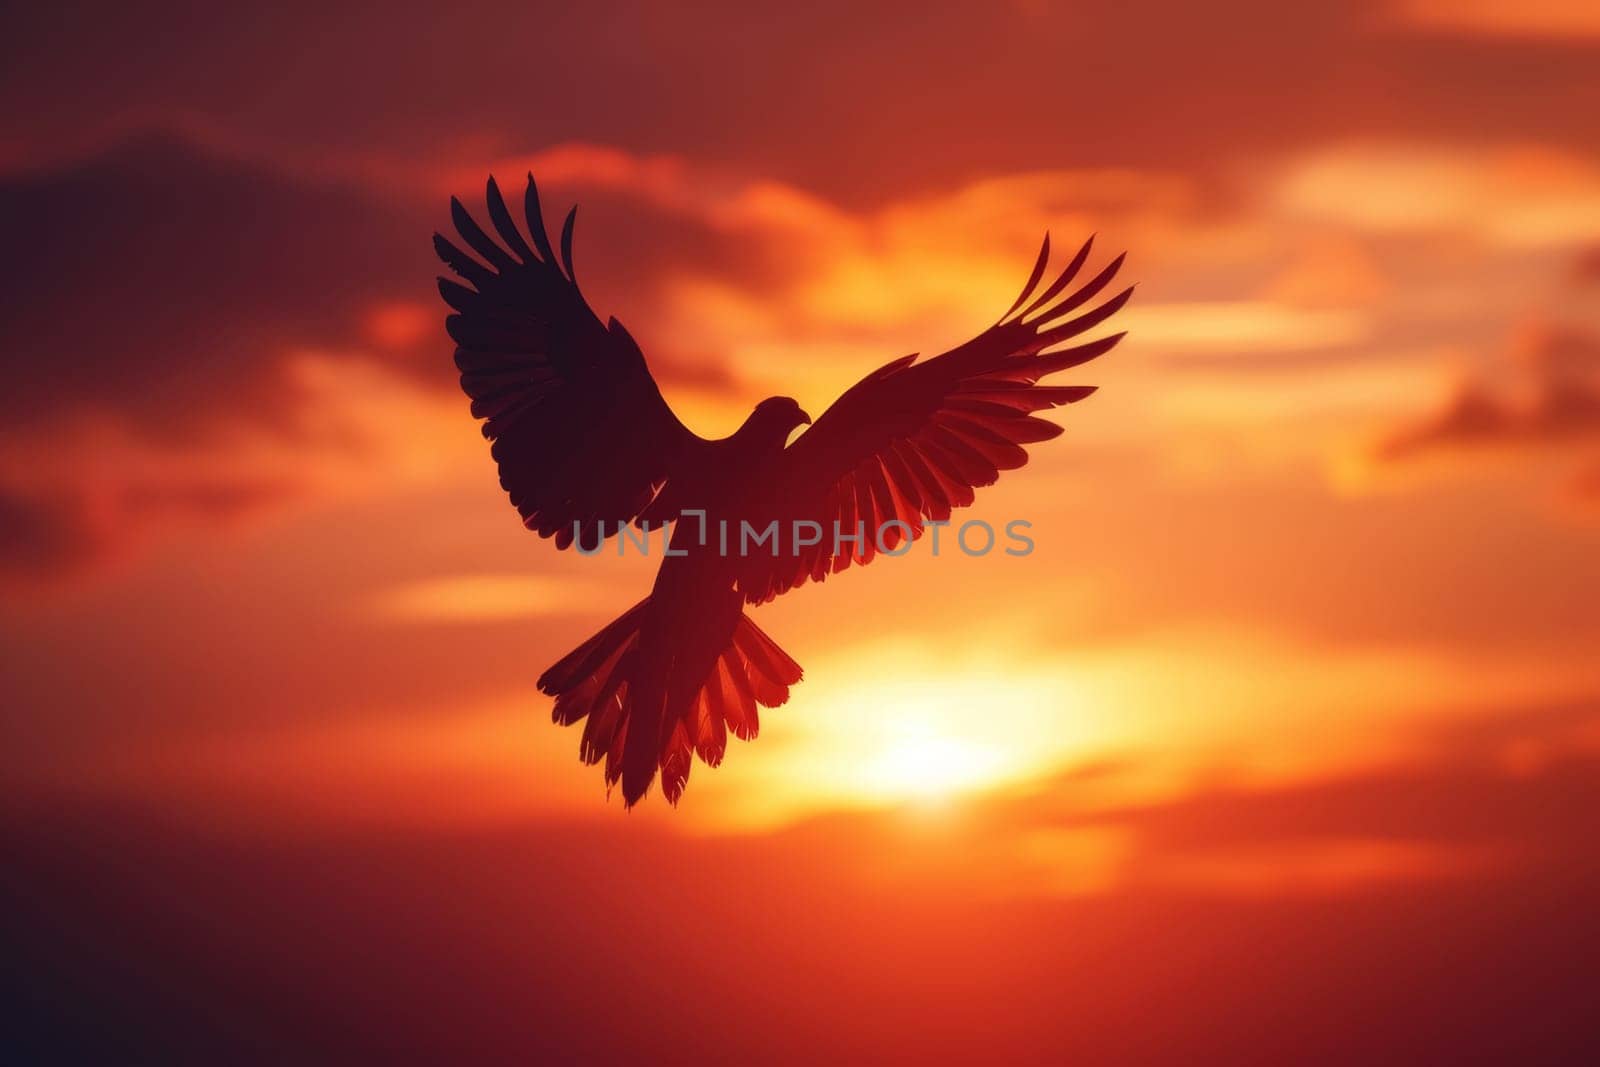 The powerful image of a bird embodying the legendary phoenix flying toward the sun during a vivid sunrise signifies new beginnings